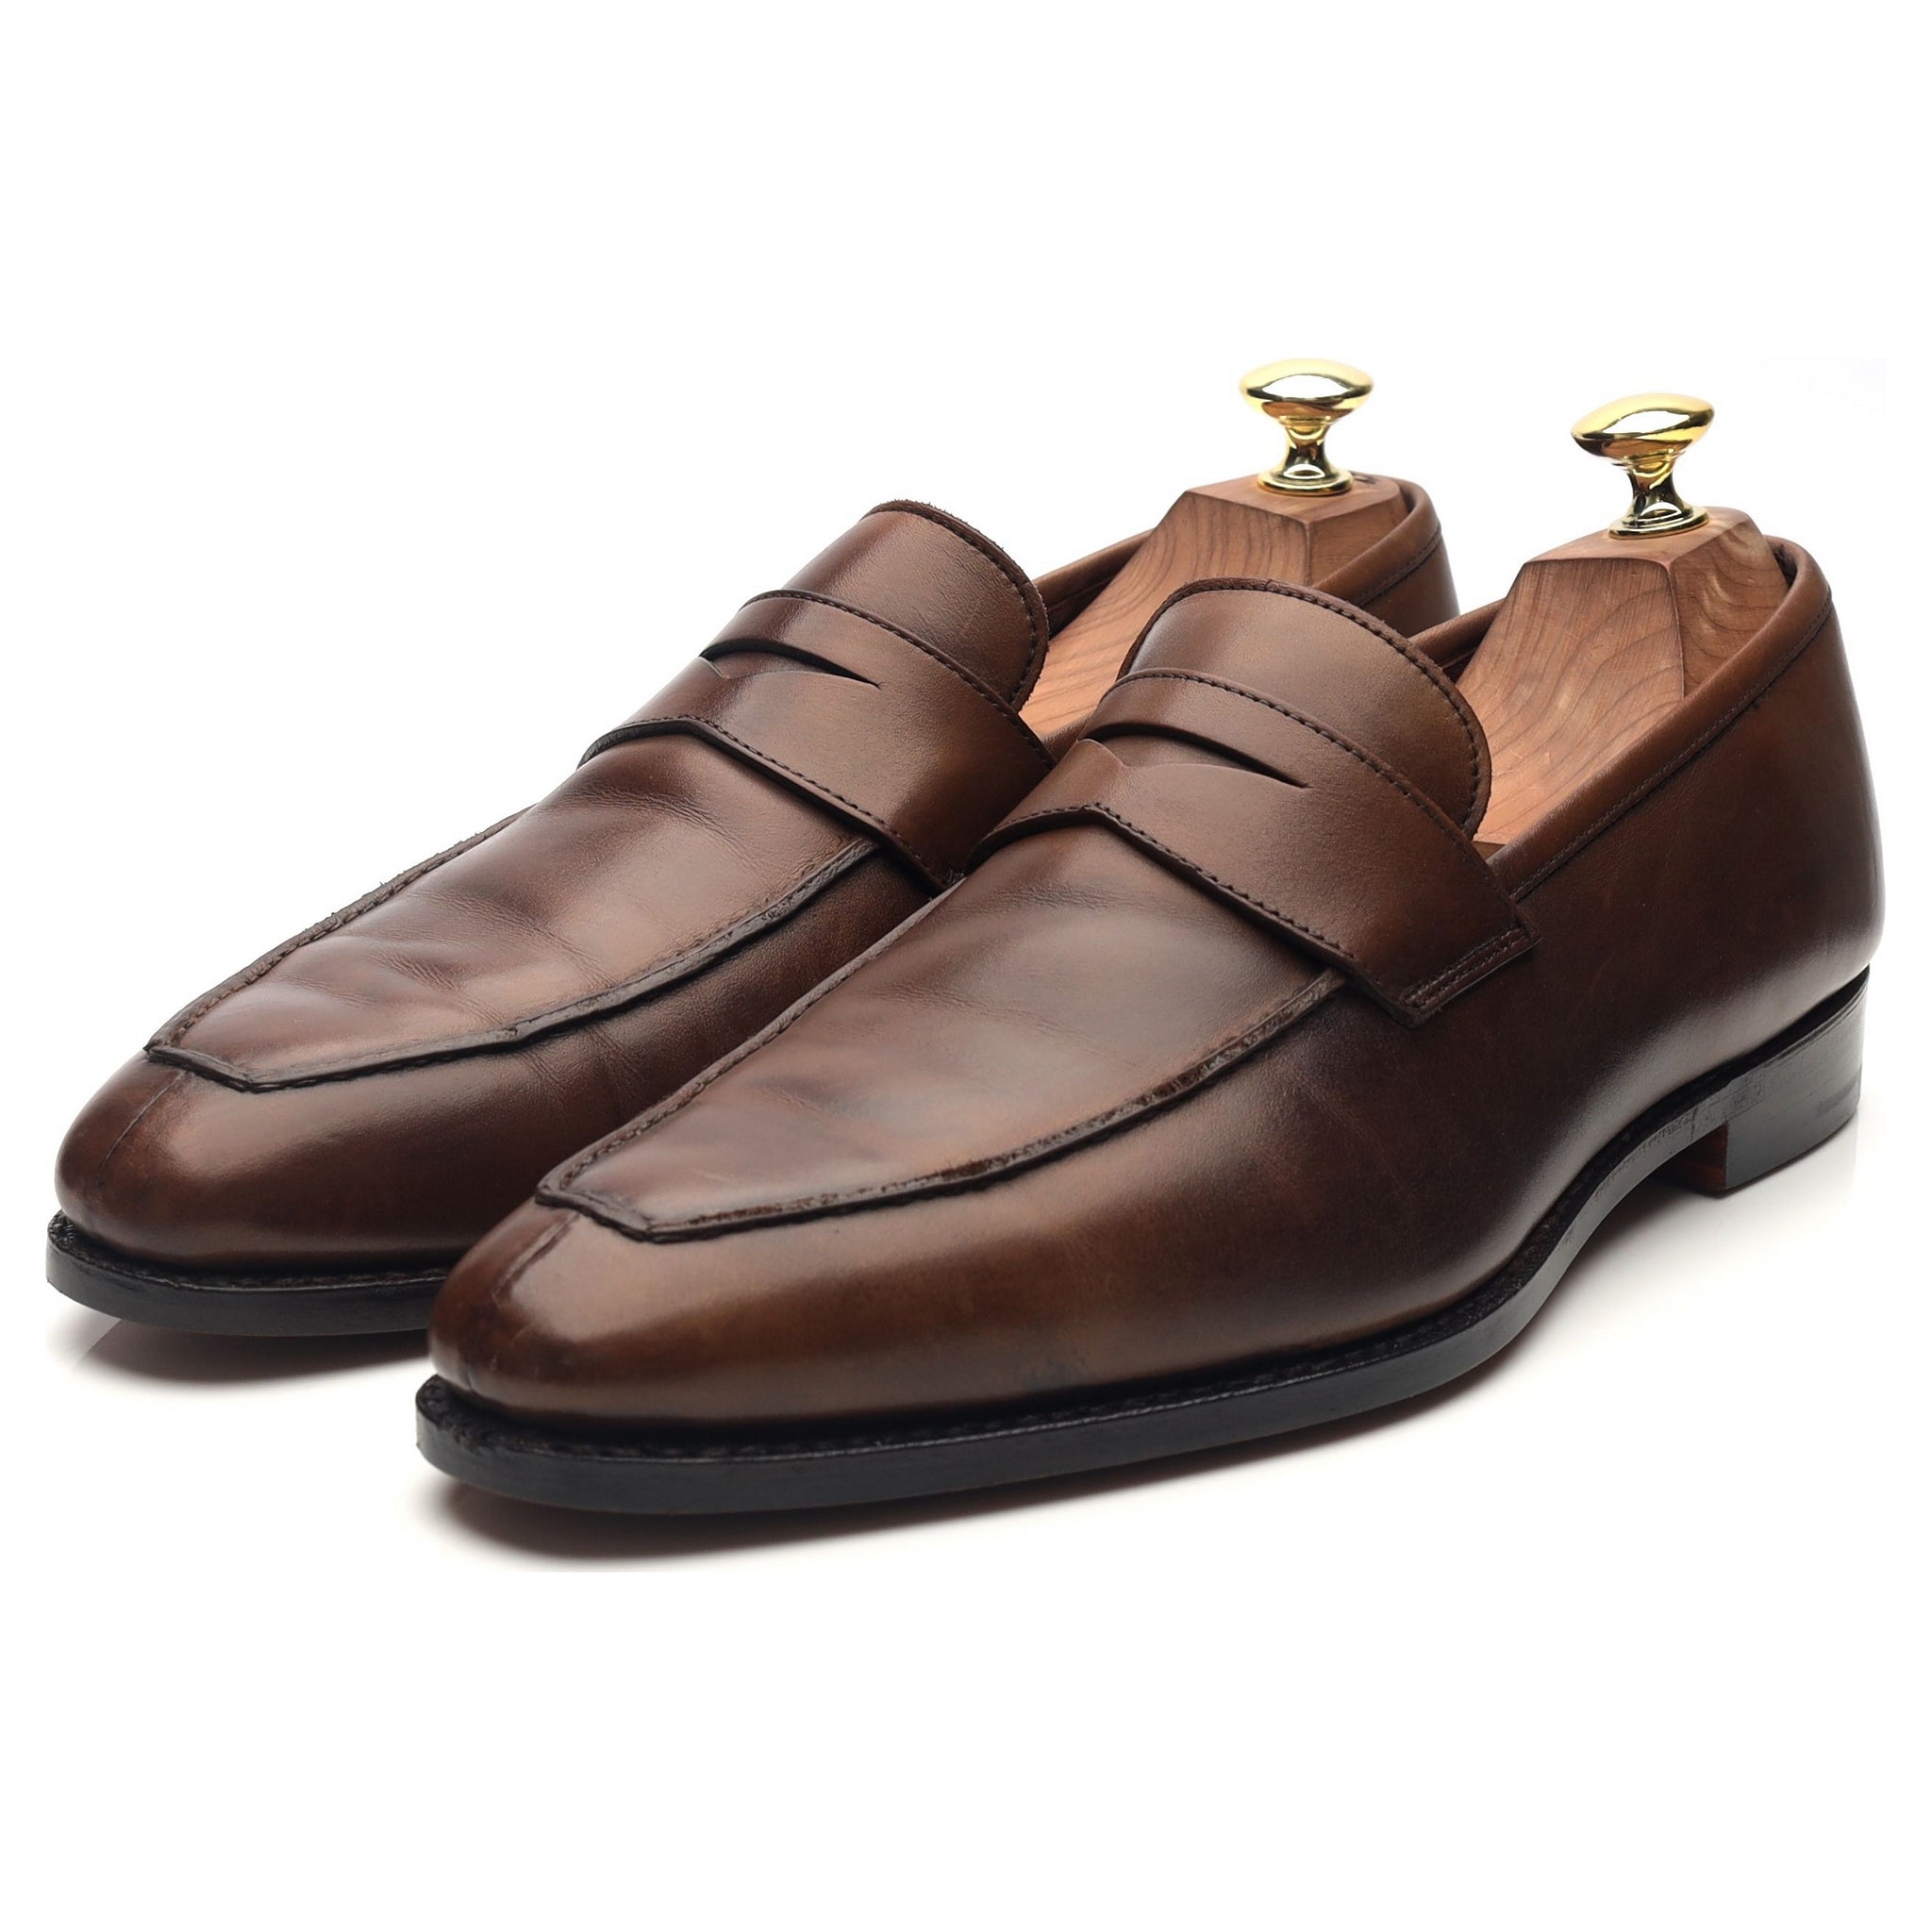 Bury' Dark Brown Leather Loafers UK 7.5 E - Abbot's Shoes